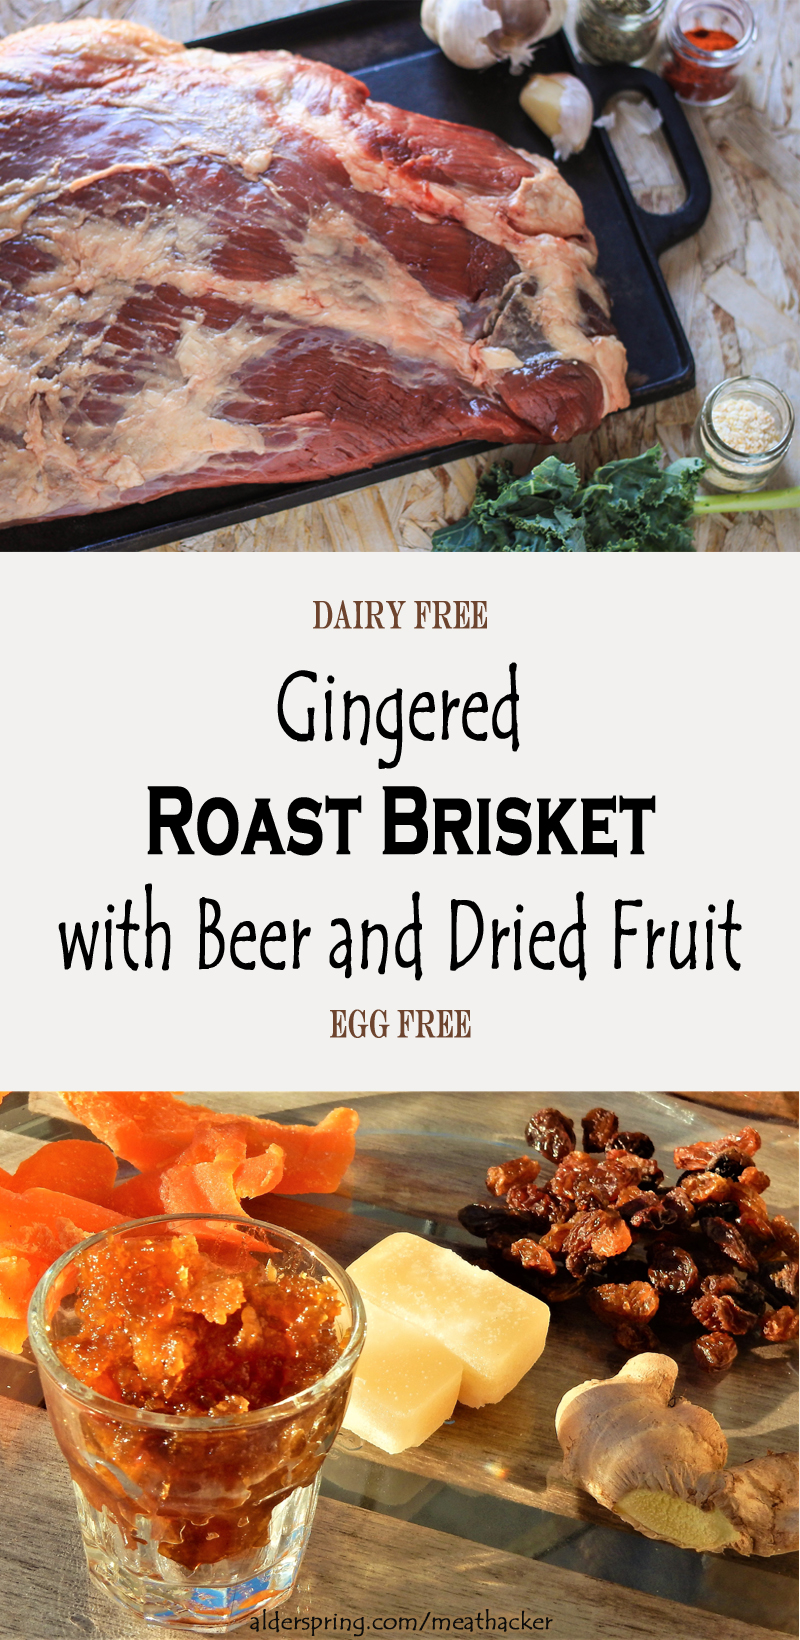 Gingered Roast Brisket with Beef and Dried Fruit